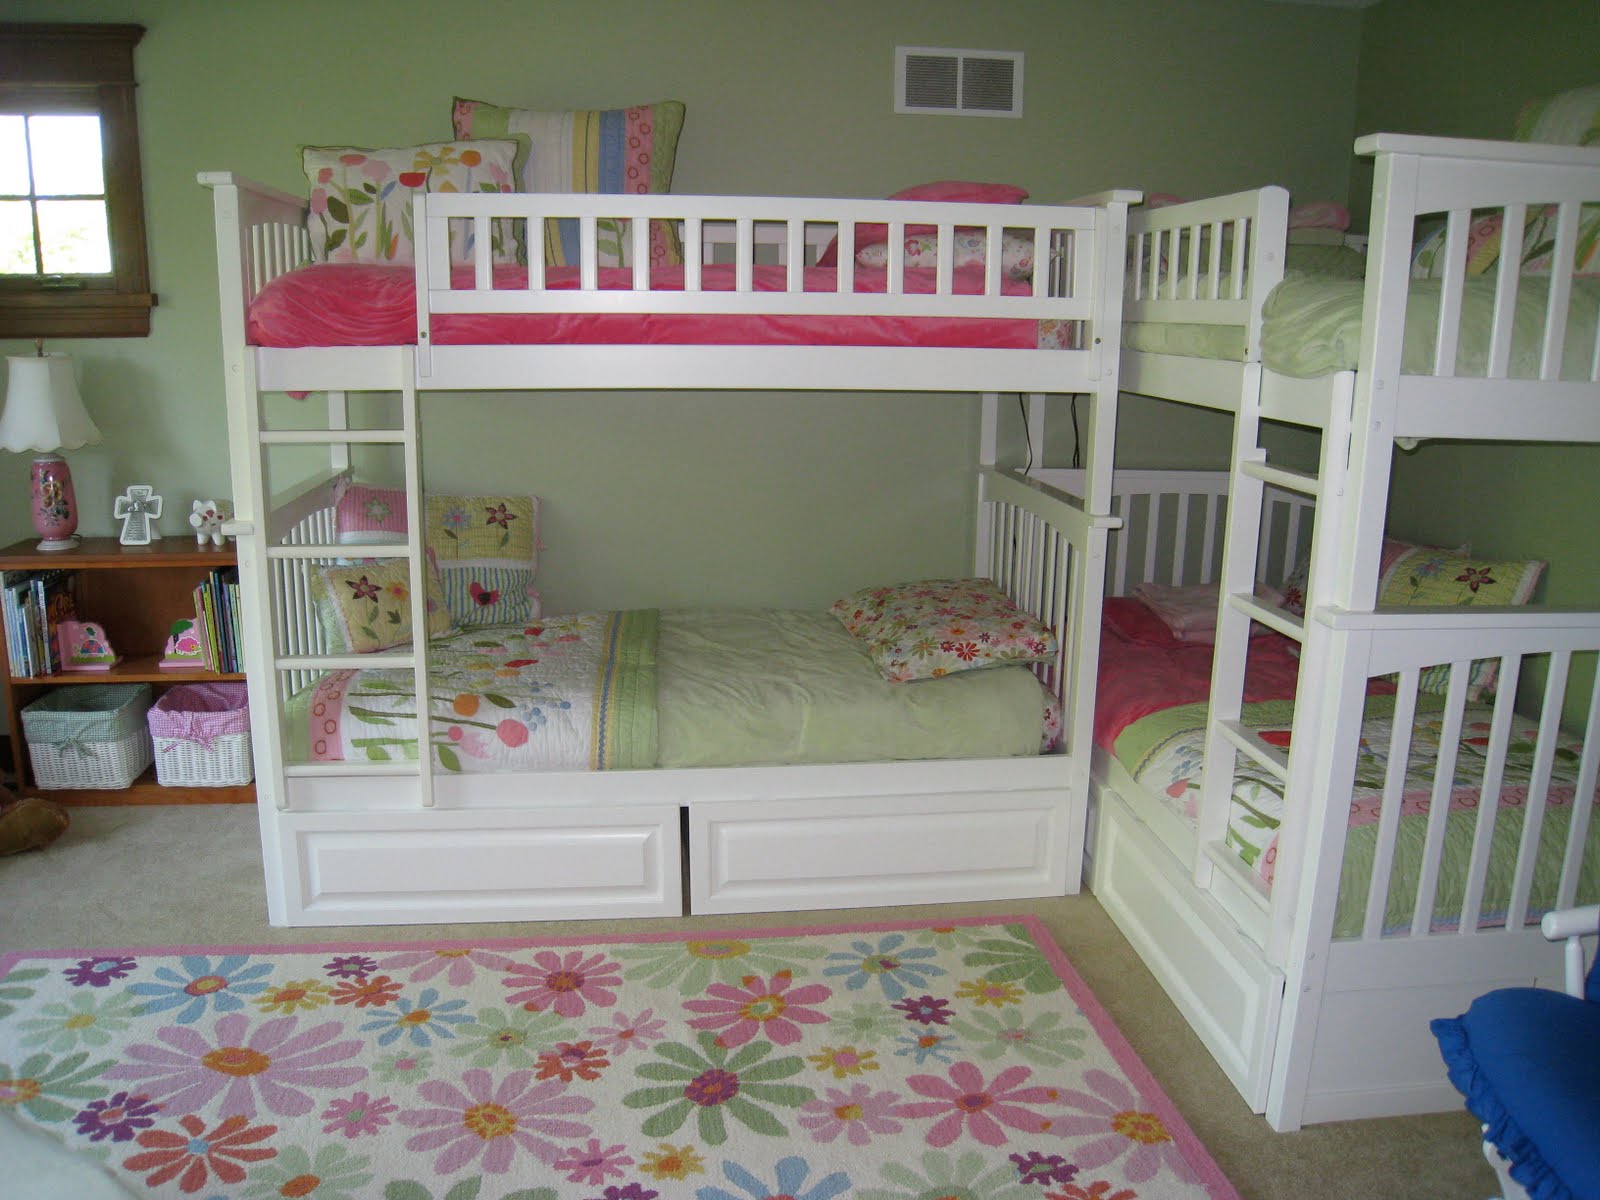 There's no place like home!: The Bunk Beds Are Up!